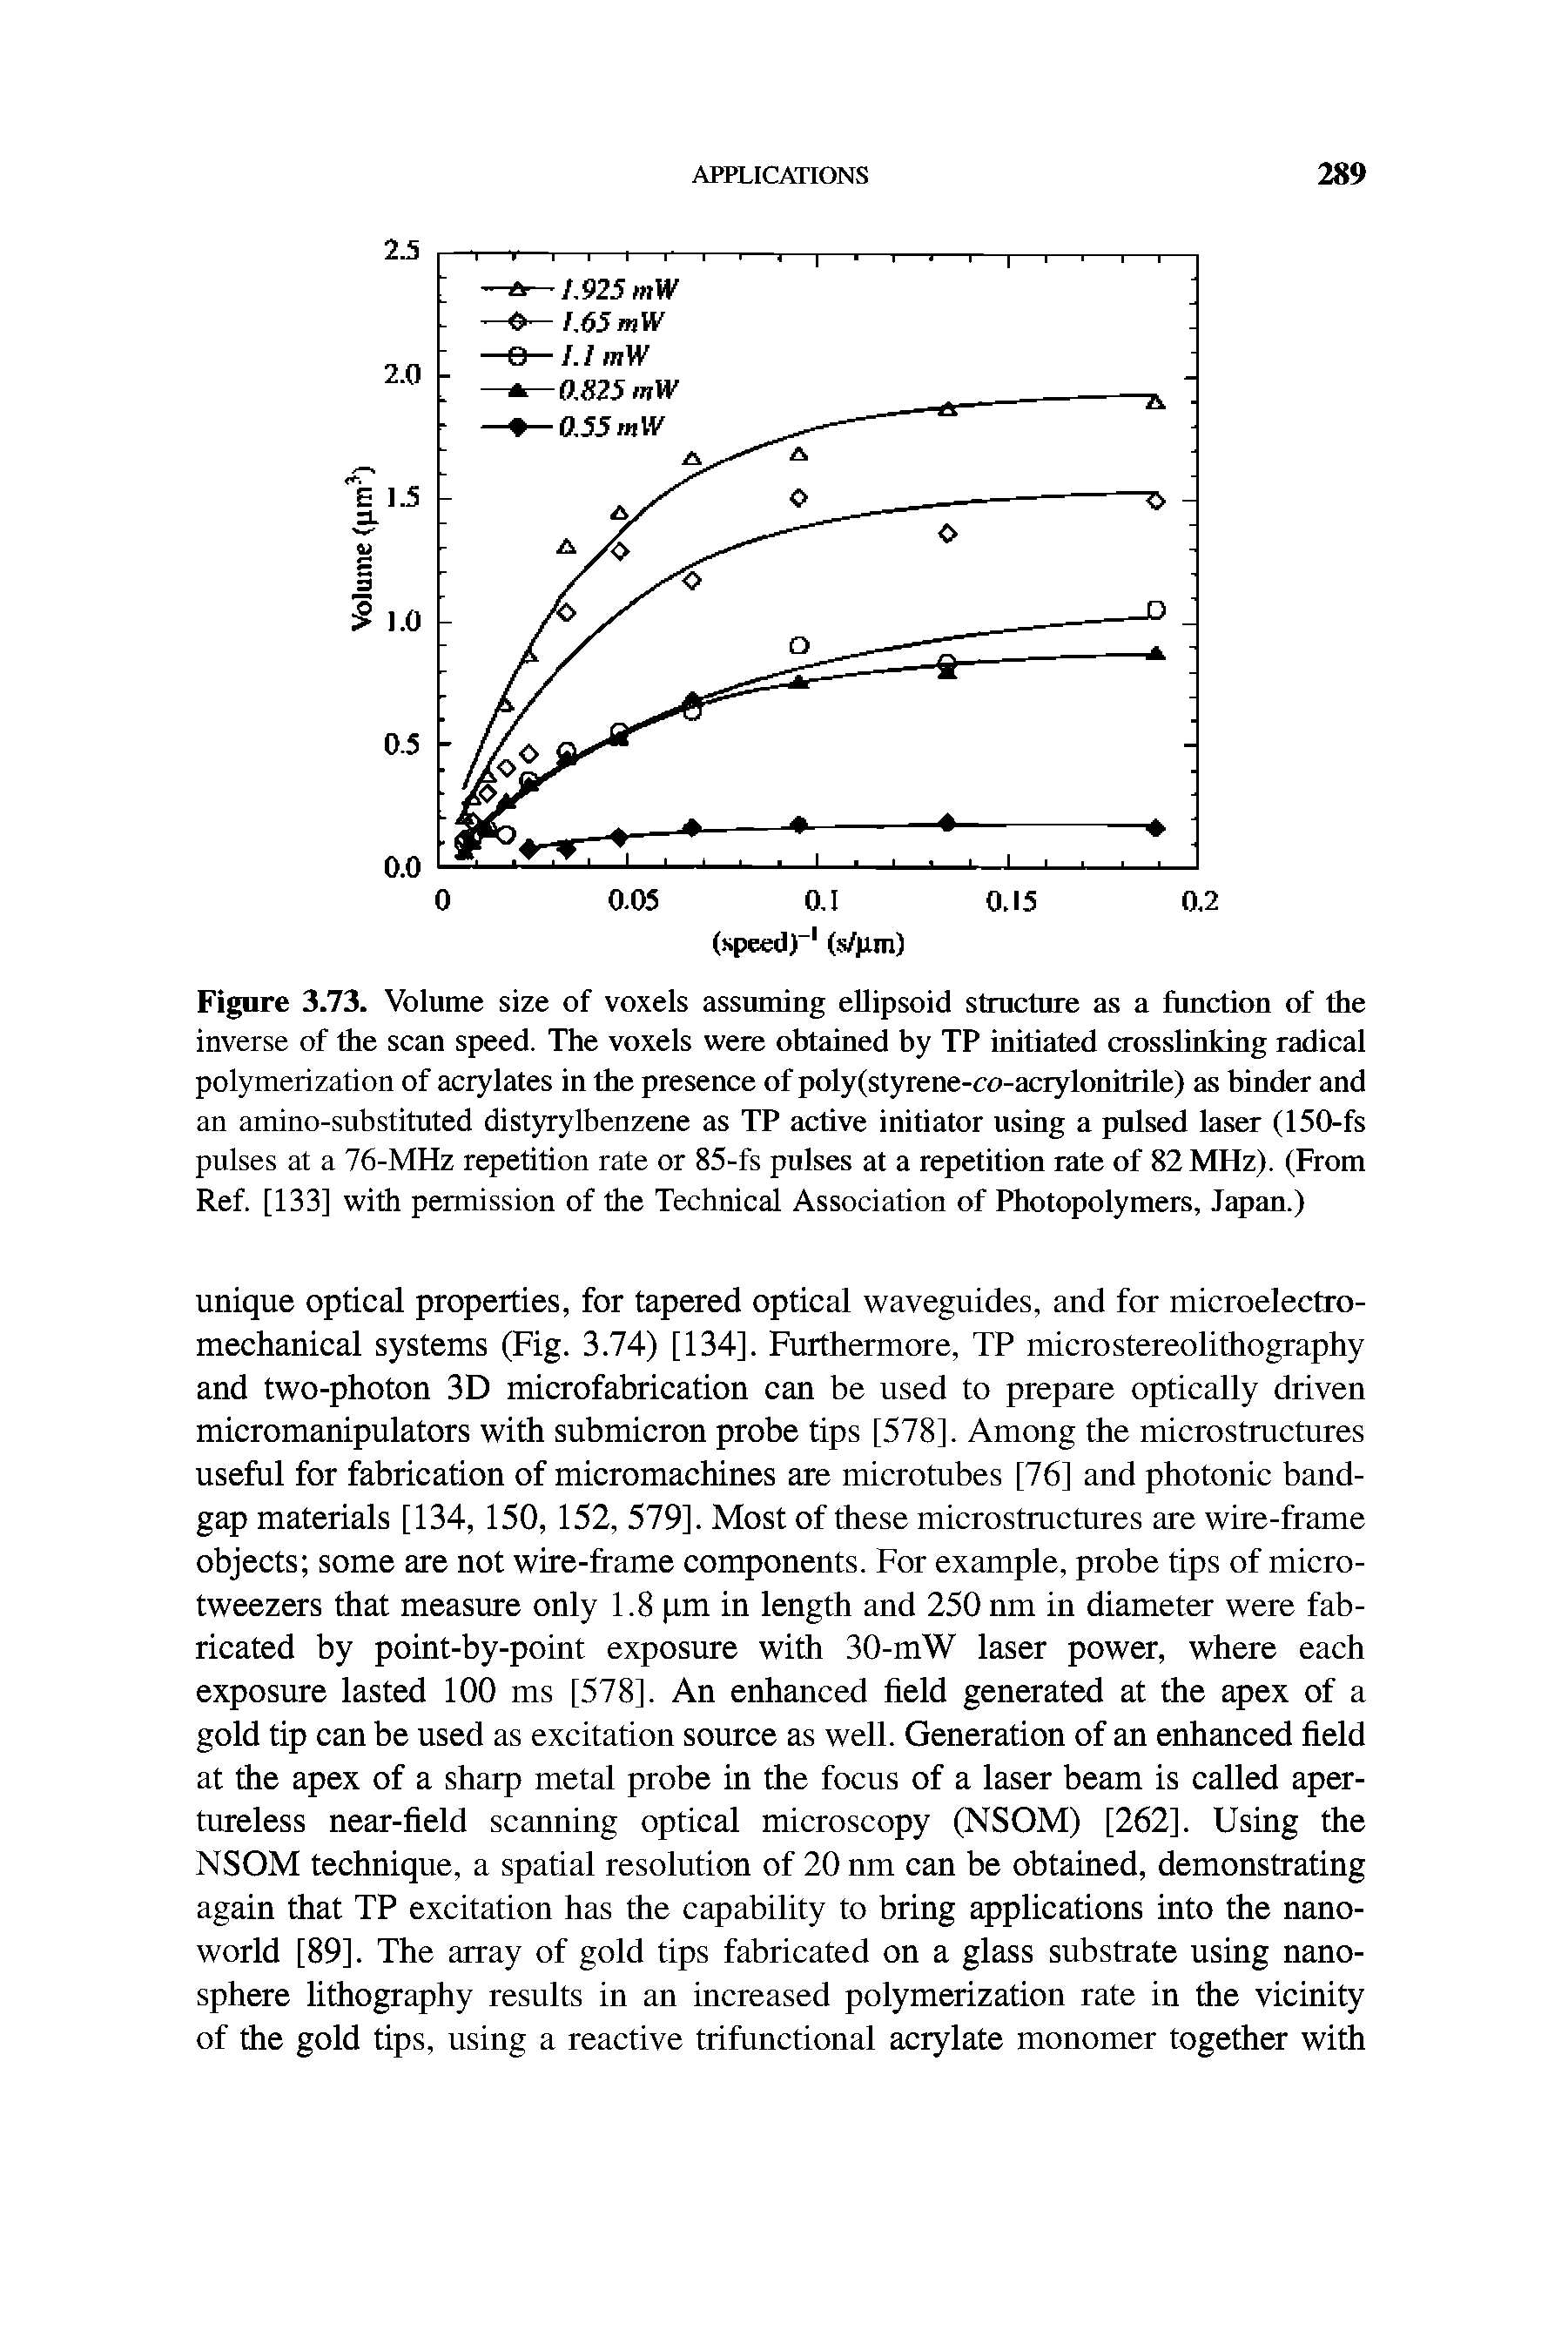 Figure 3.73. Volume size of voxels assuming ellipsoid structure as a function of the inverse of the scan speed. The voxels were obtained by TP initiated crosslinking radical polymerization of acrylates in the presence of poly (styrene-co-acrylonitrile) as binder and an amino-substituted distyrylbenzene as TP active initiator using a pulsed laser (150-fs pulses at a 76-MHz repetition rate or 85-fs pulses at a repetition rate of 82 MHz). (From Ref. [133] with permission of the Technical Association of Photopolymers, Japan.)...